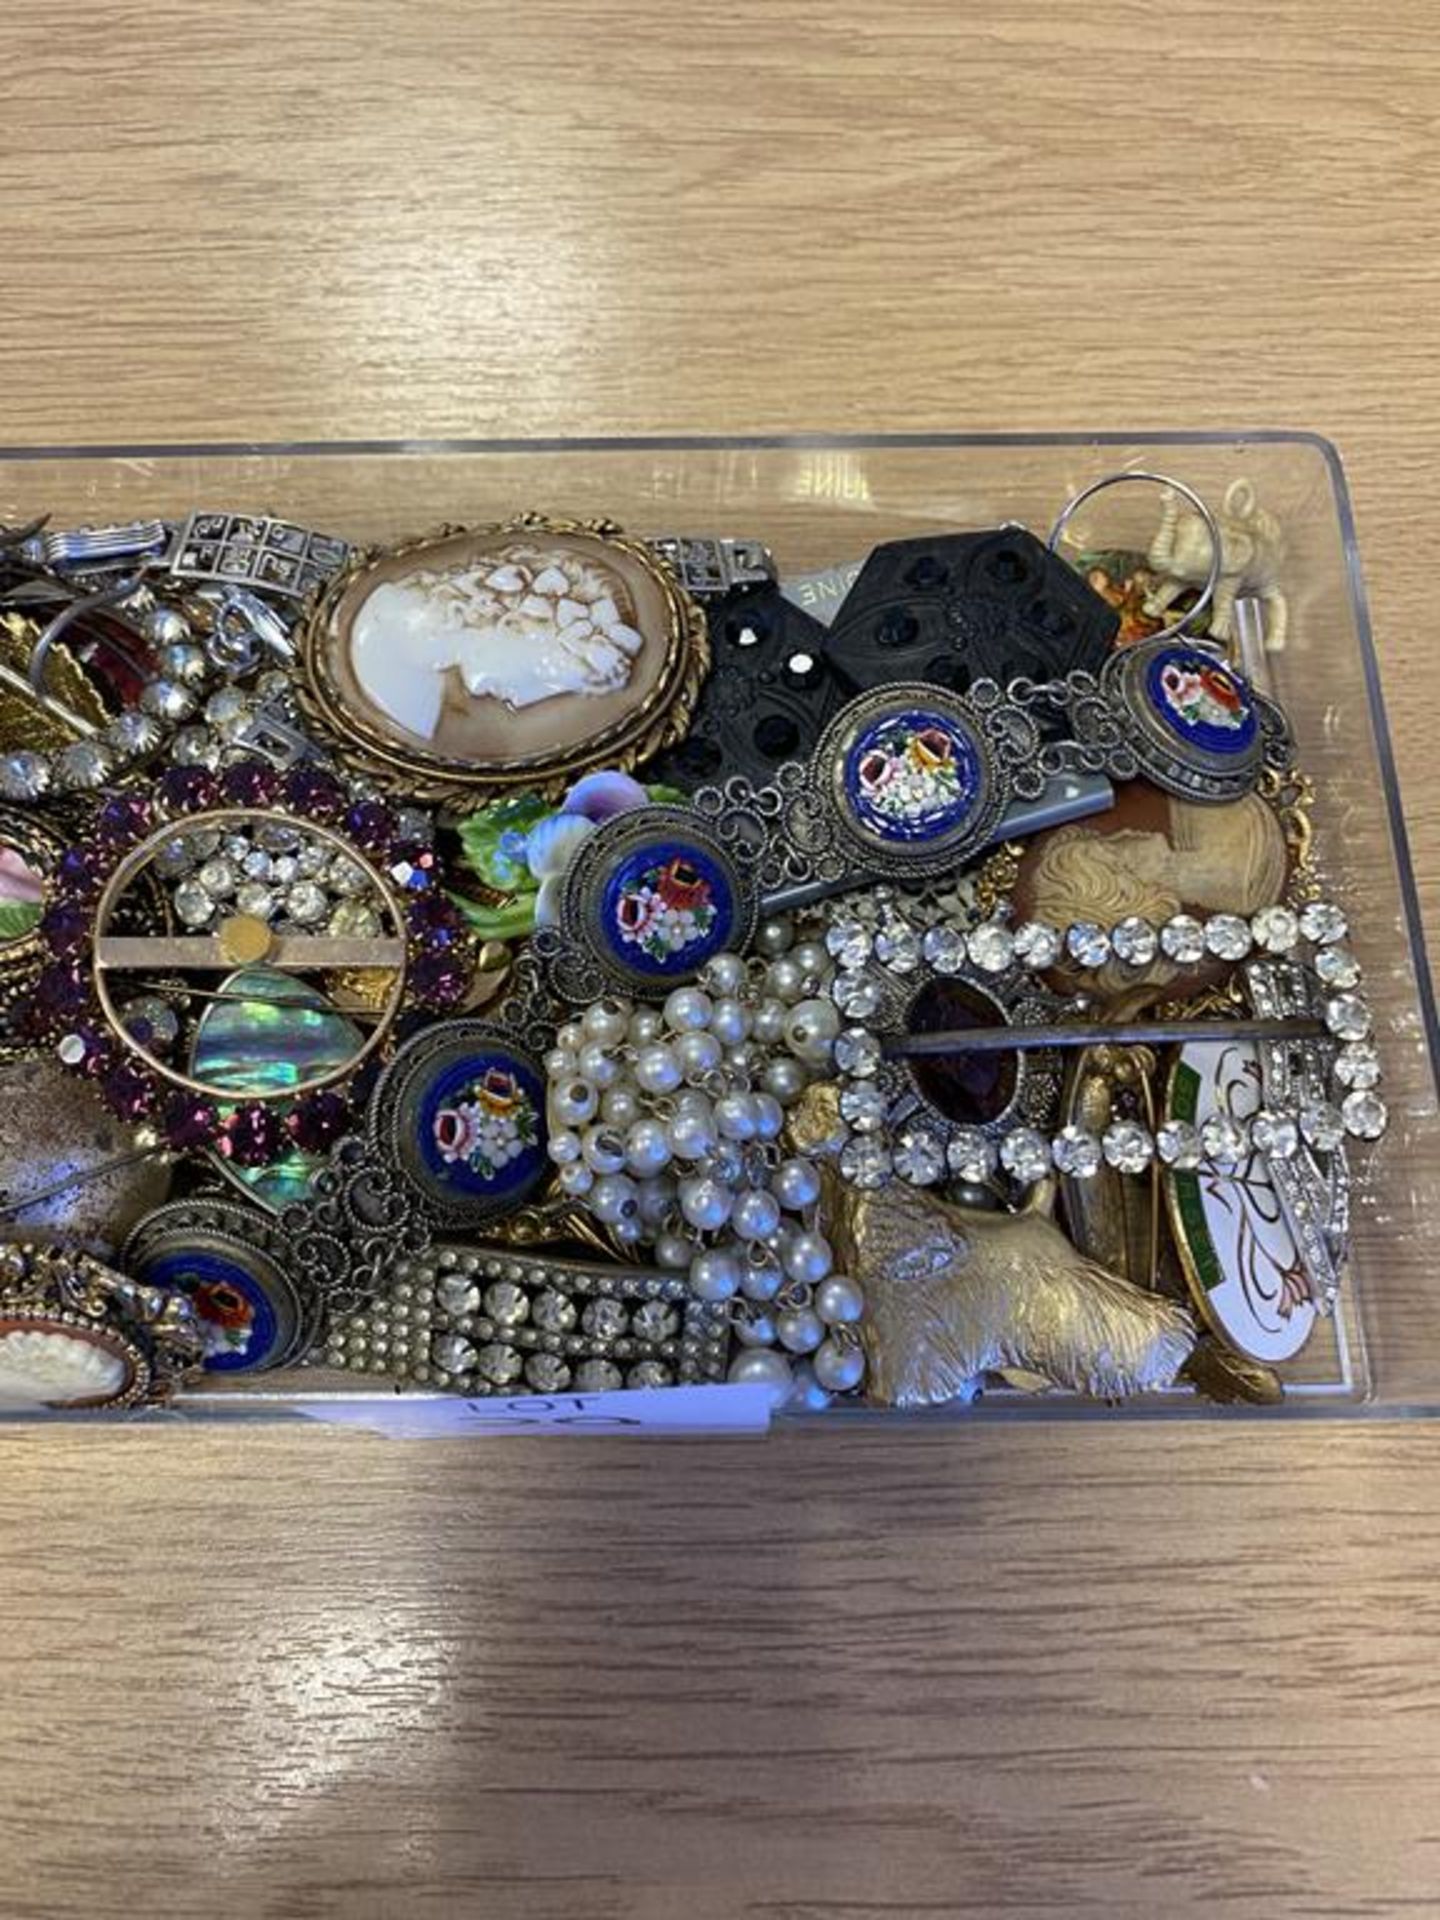 Vintage Costume Jewellery including a Micro Mosaic Bracelet, Cameo Type Brooches - Image 3 of 3